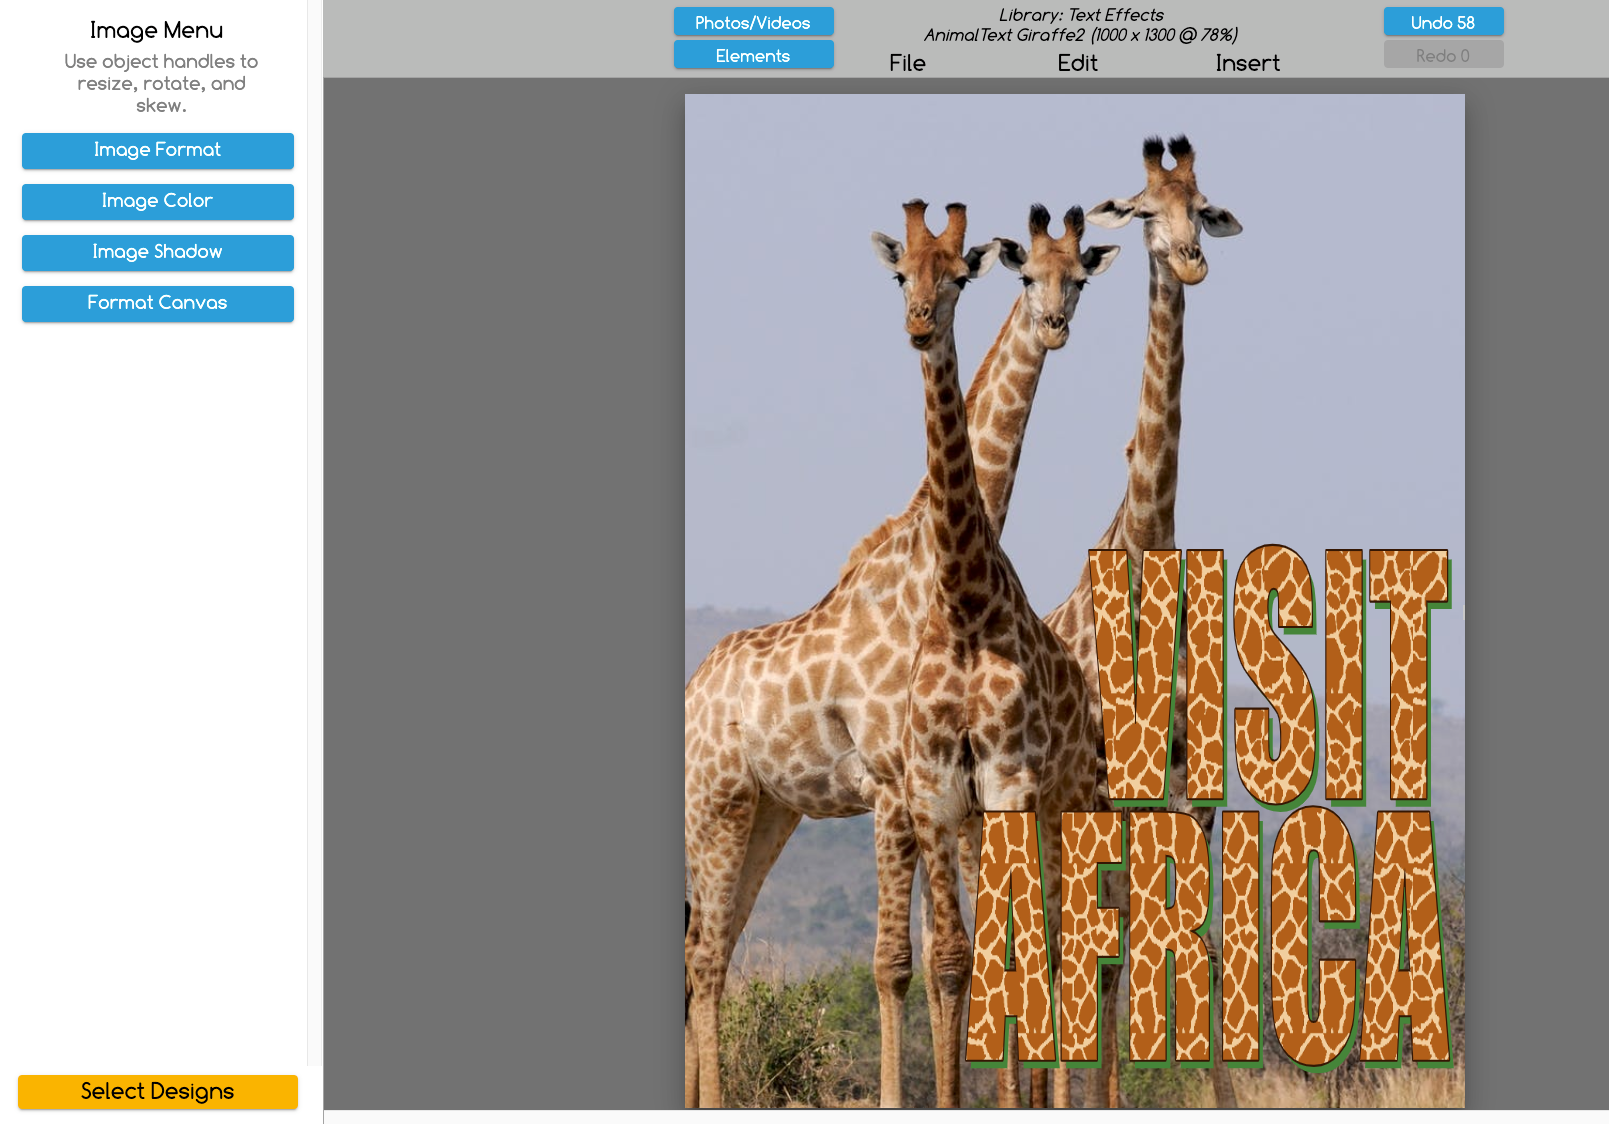 Customized text graphics with Giraffe Image